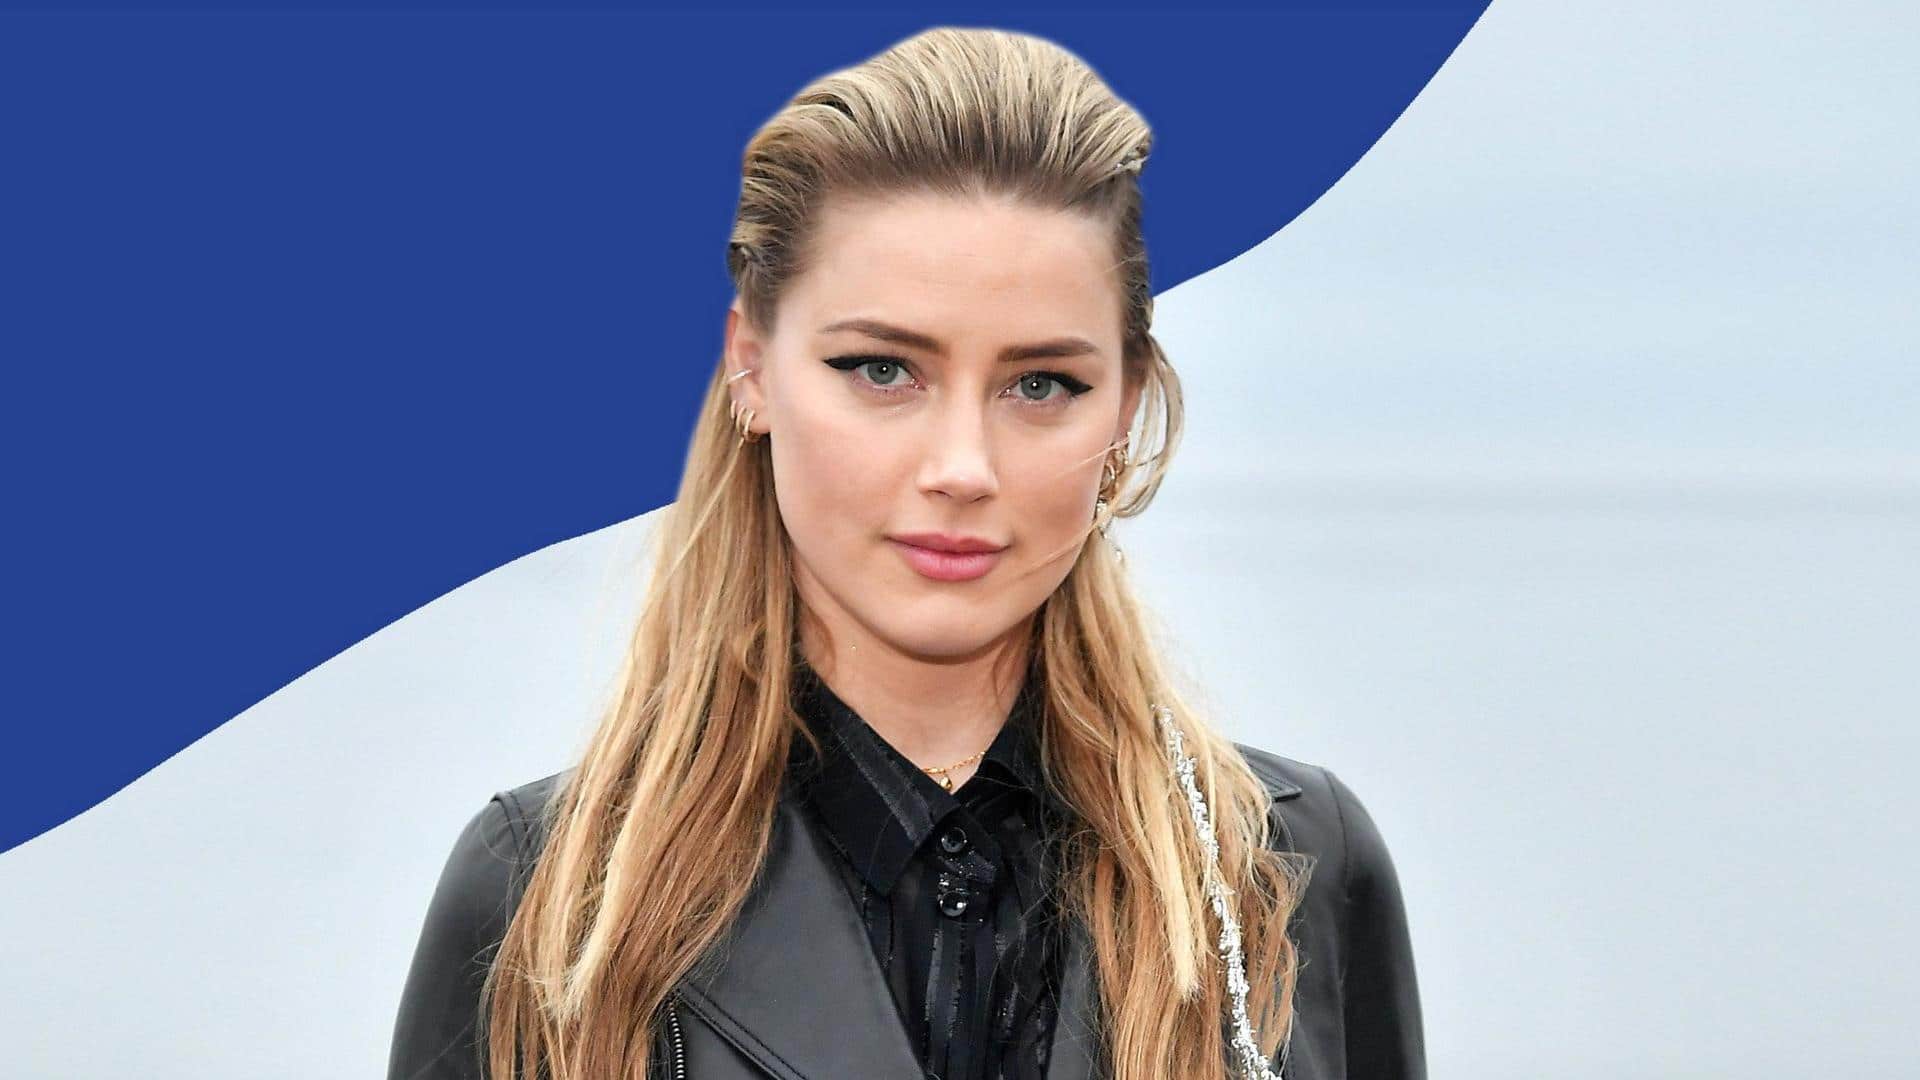 'In the Fire' director, co-star laud Amber Heard's resilience